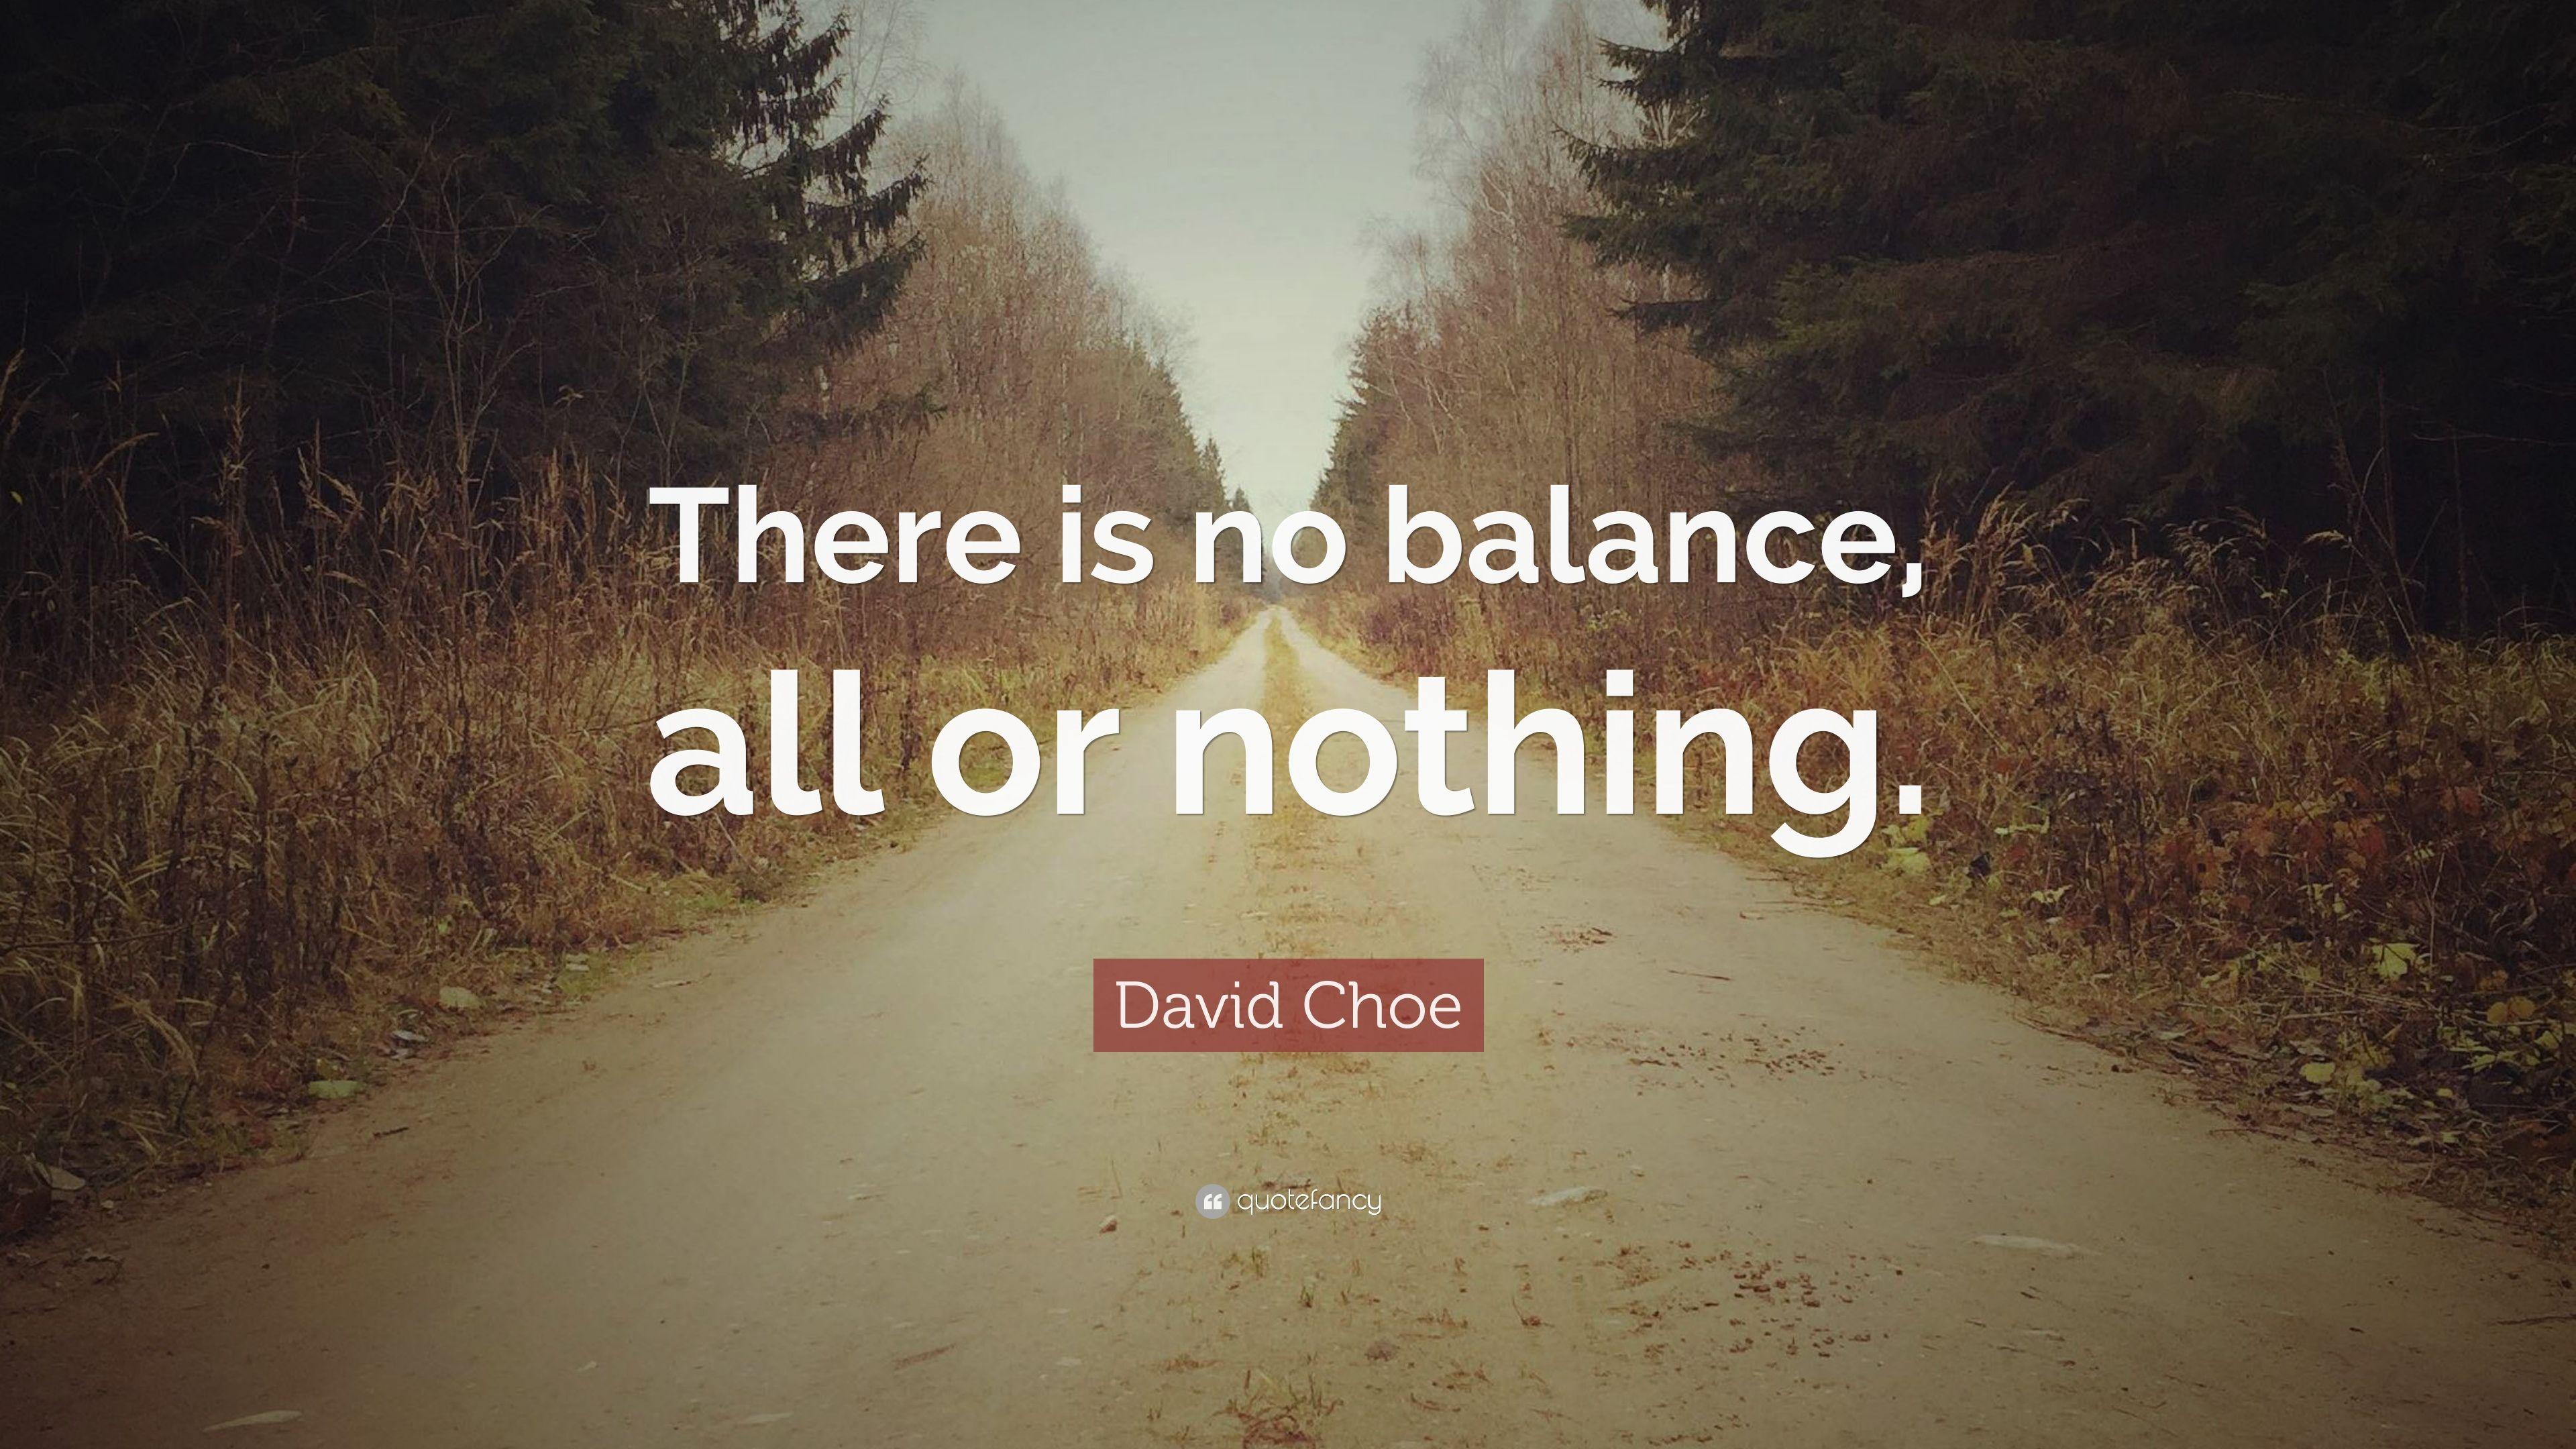 David Choe Quote: “There is no balance, all or nothing.” 12